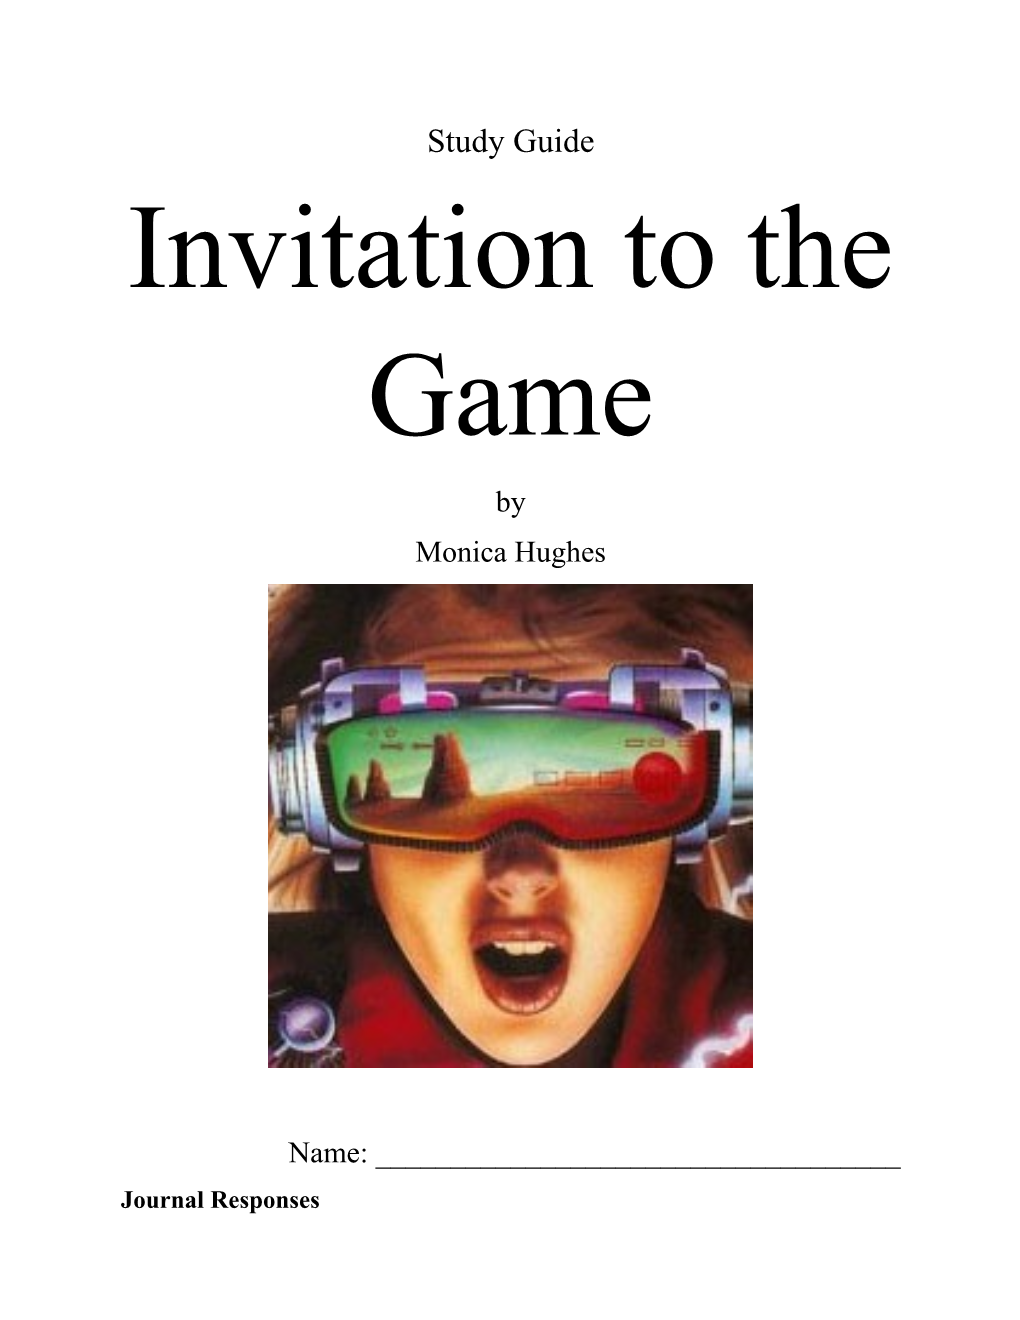 Invitation to the Game